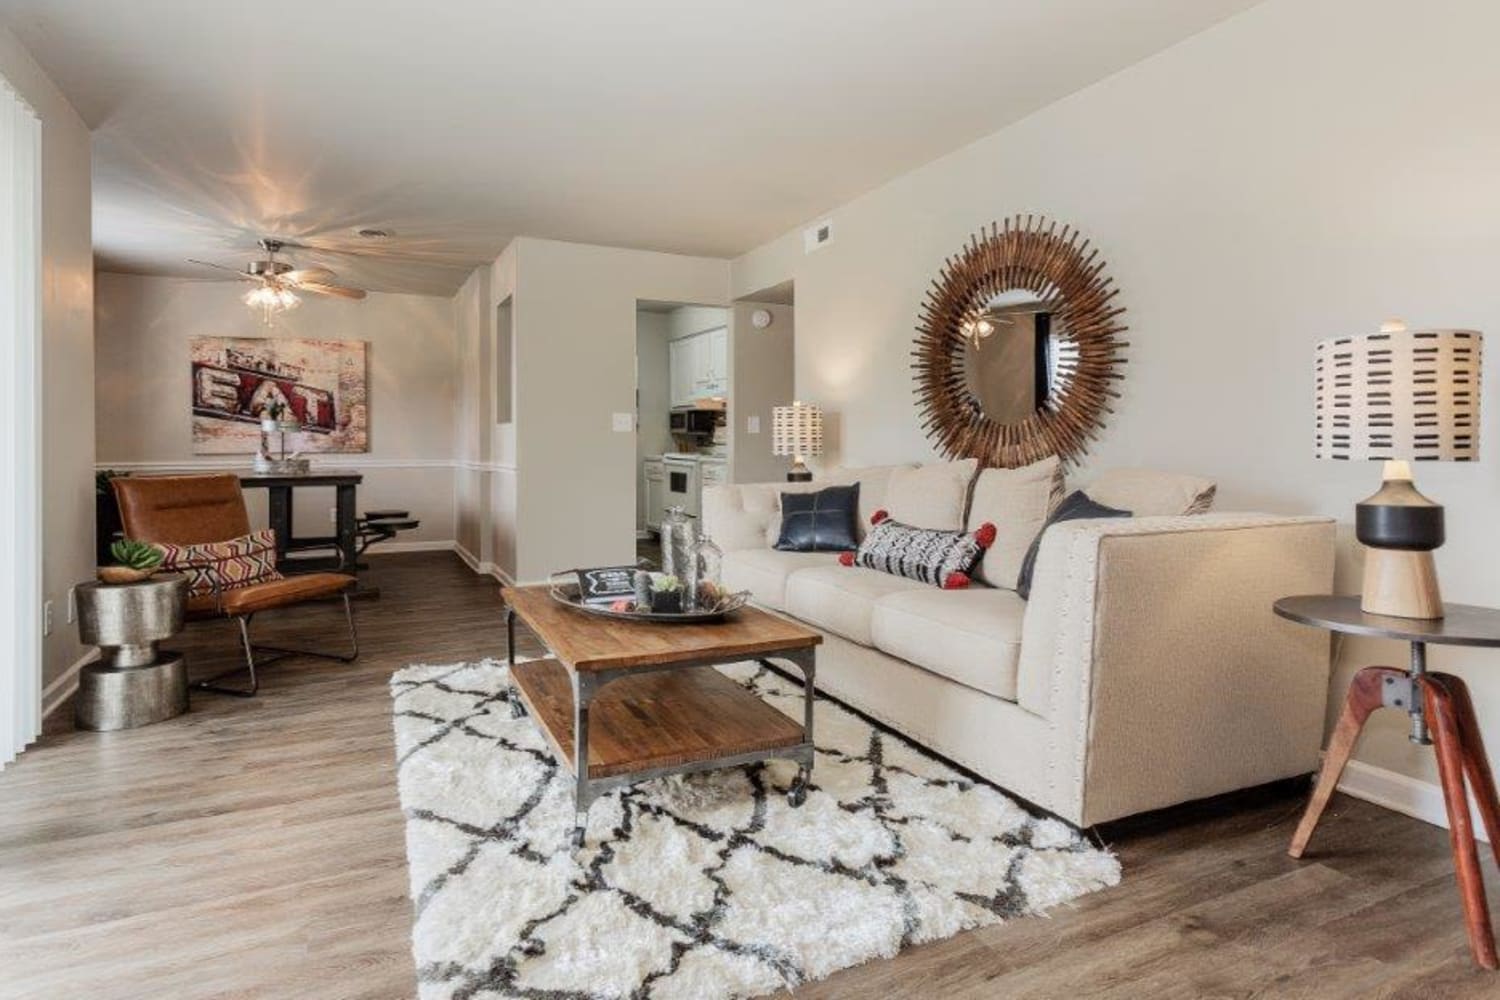 Living room at Lincoya Bay Apartments & Townhomes in Nashville, Tennessee